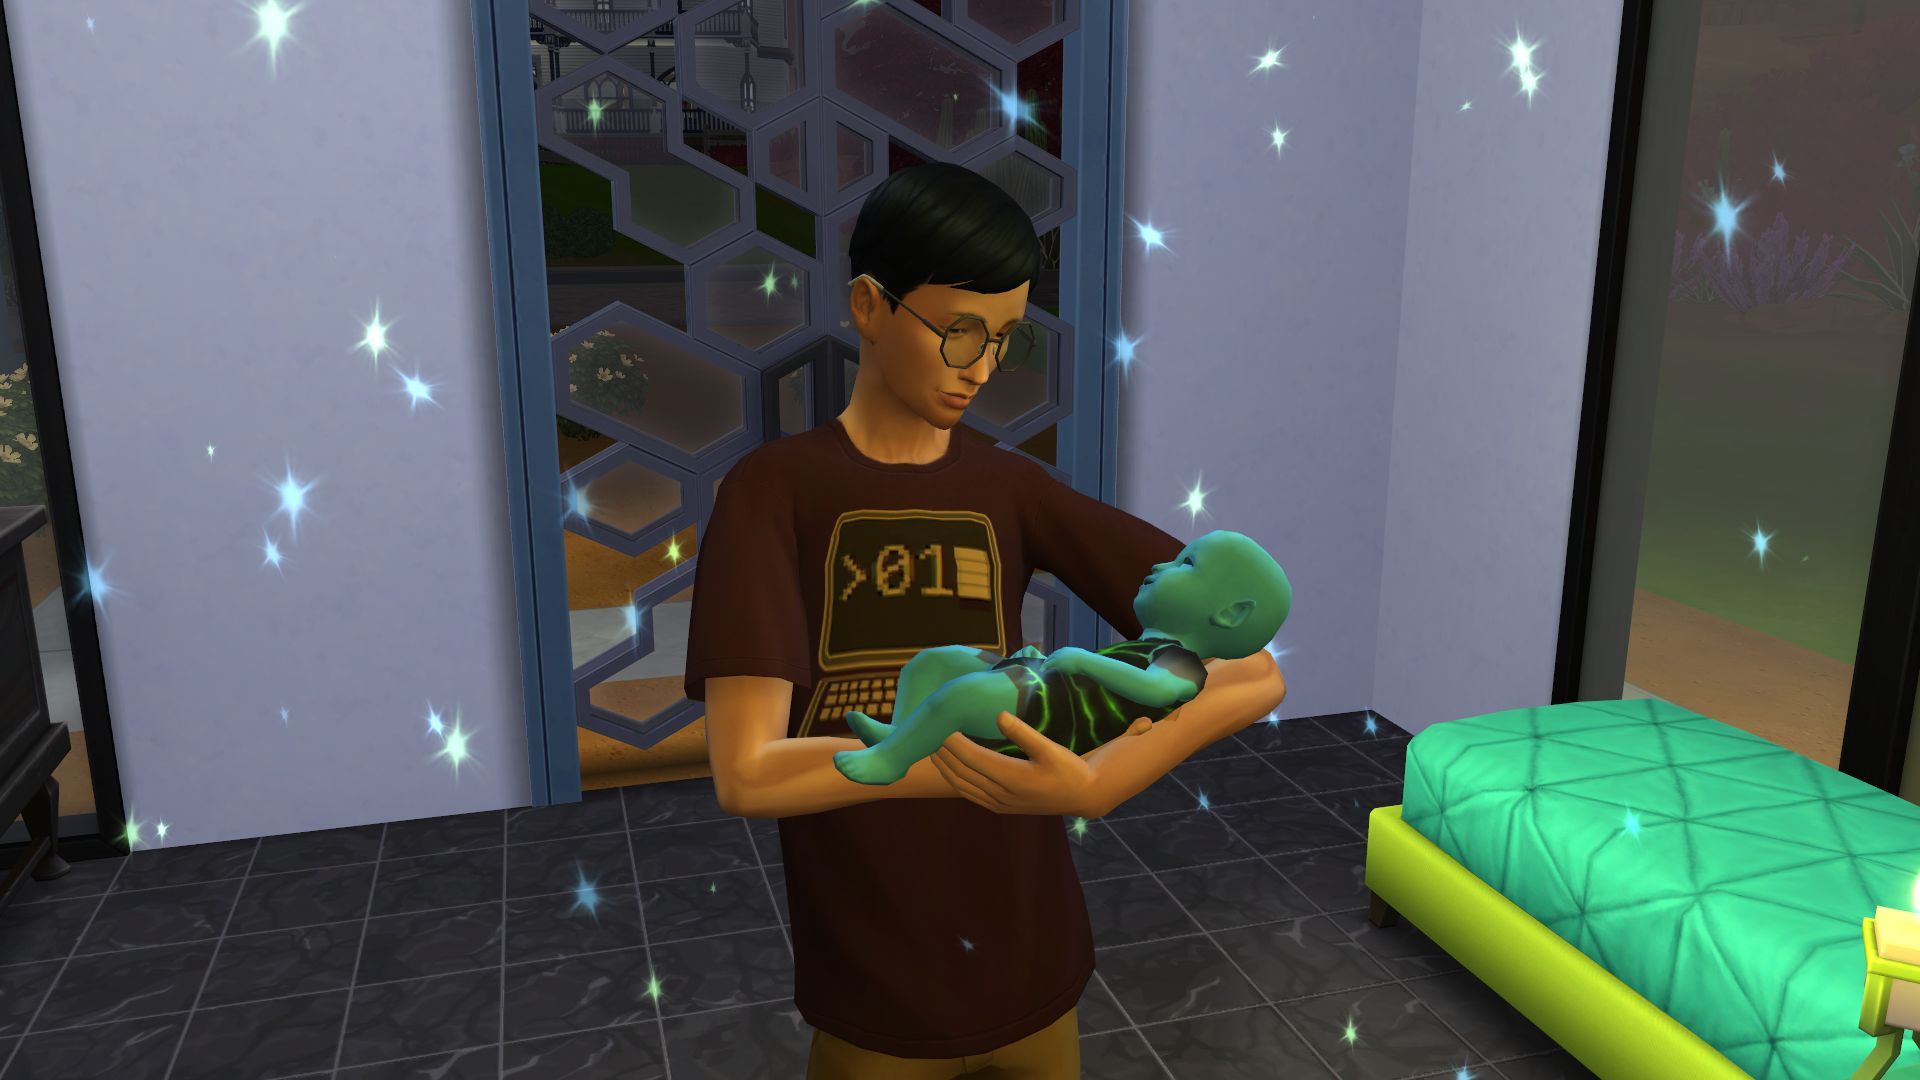 An image of a Sim from The Sims 4 holding an alien baby.